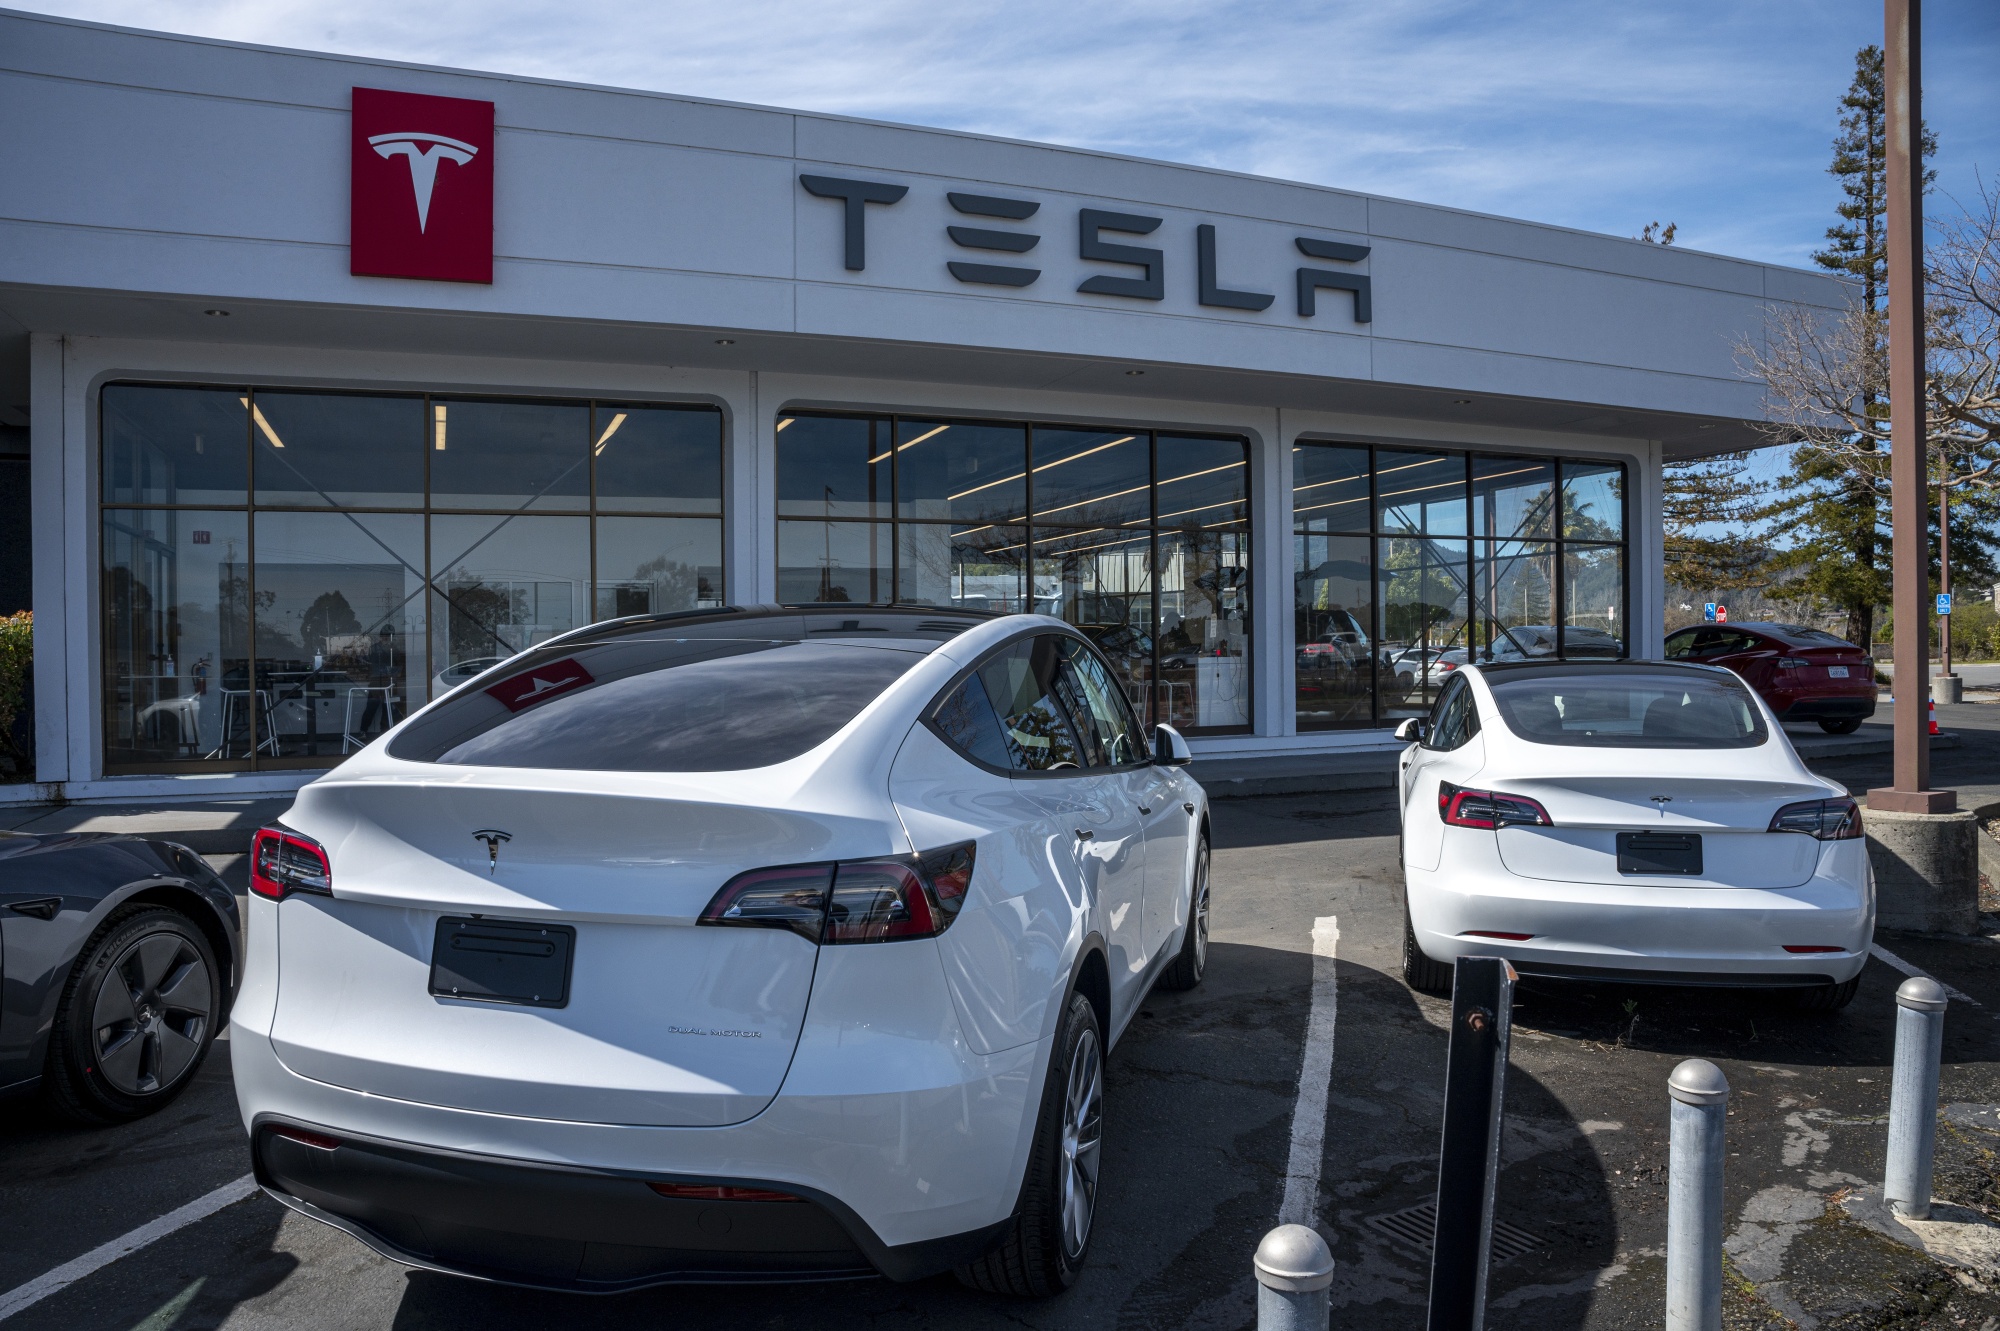 Top Analysts Appreciate Tesla's Latest Strategic Move and Predict Financial Gains